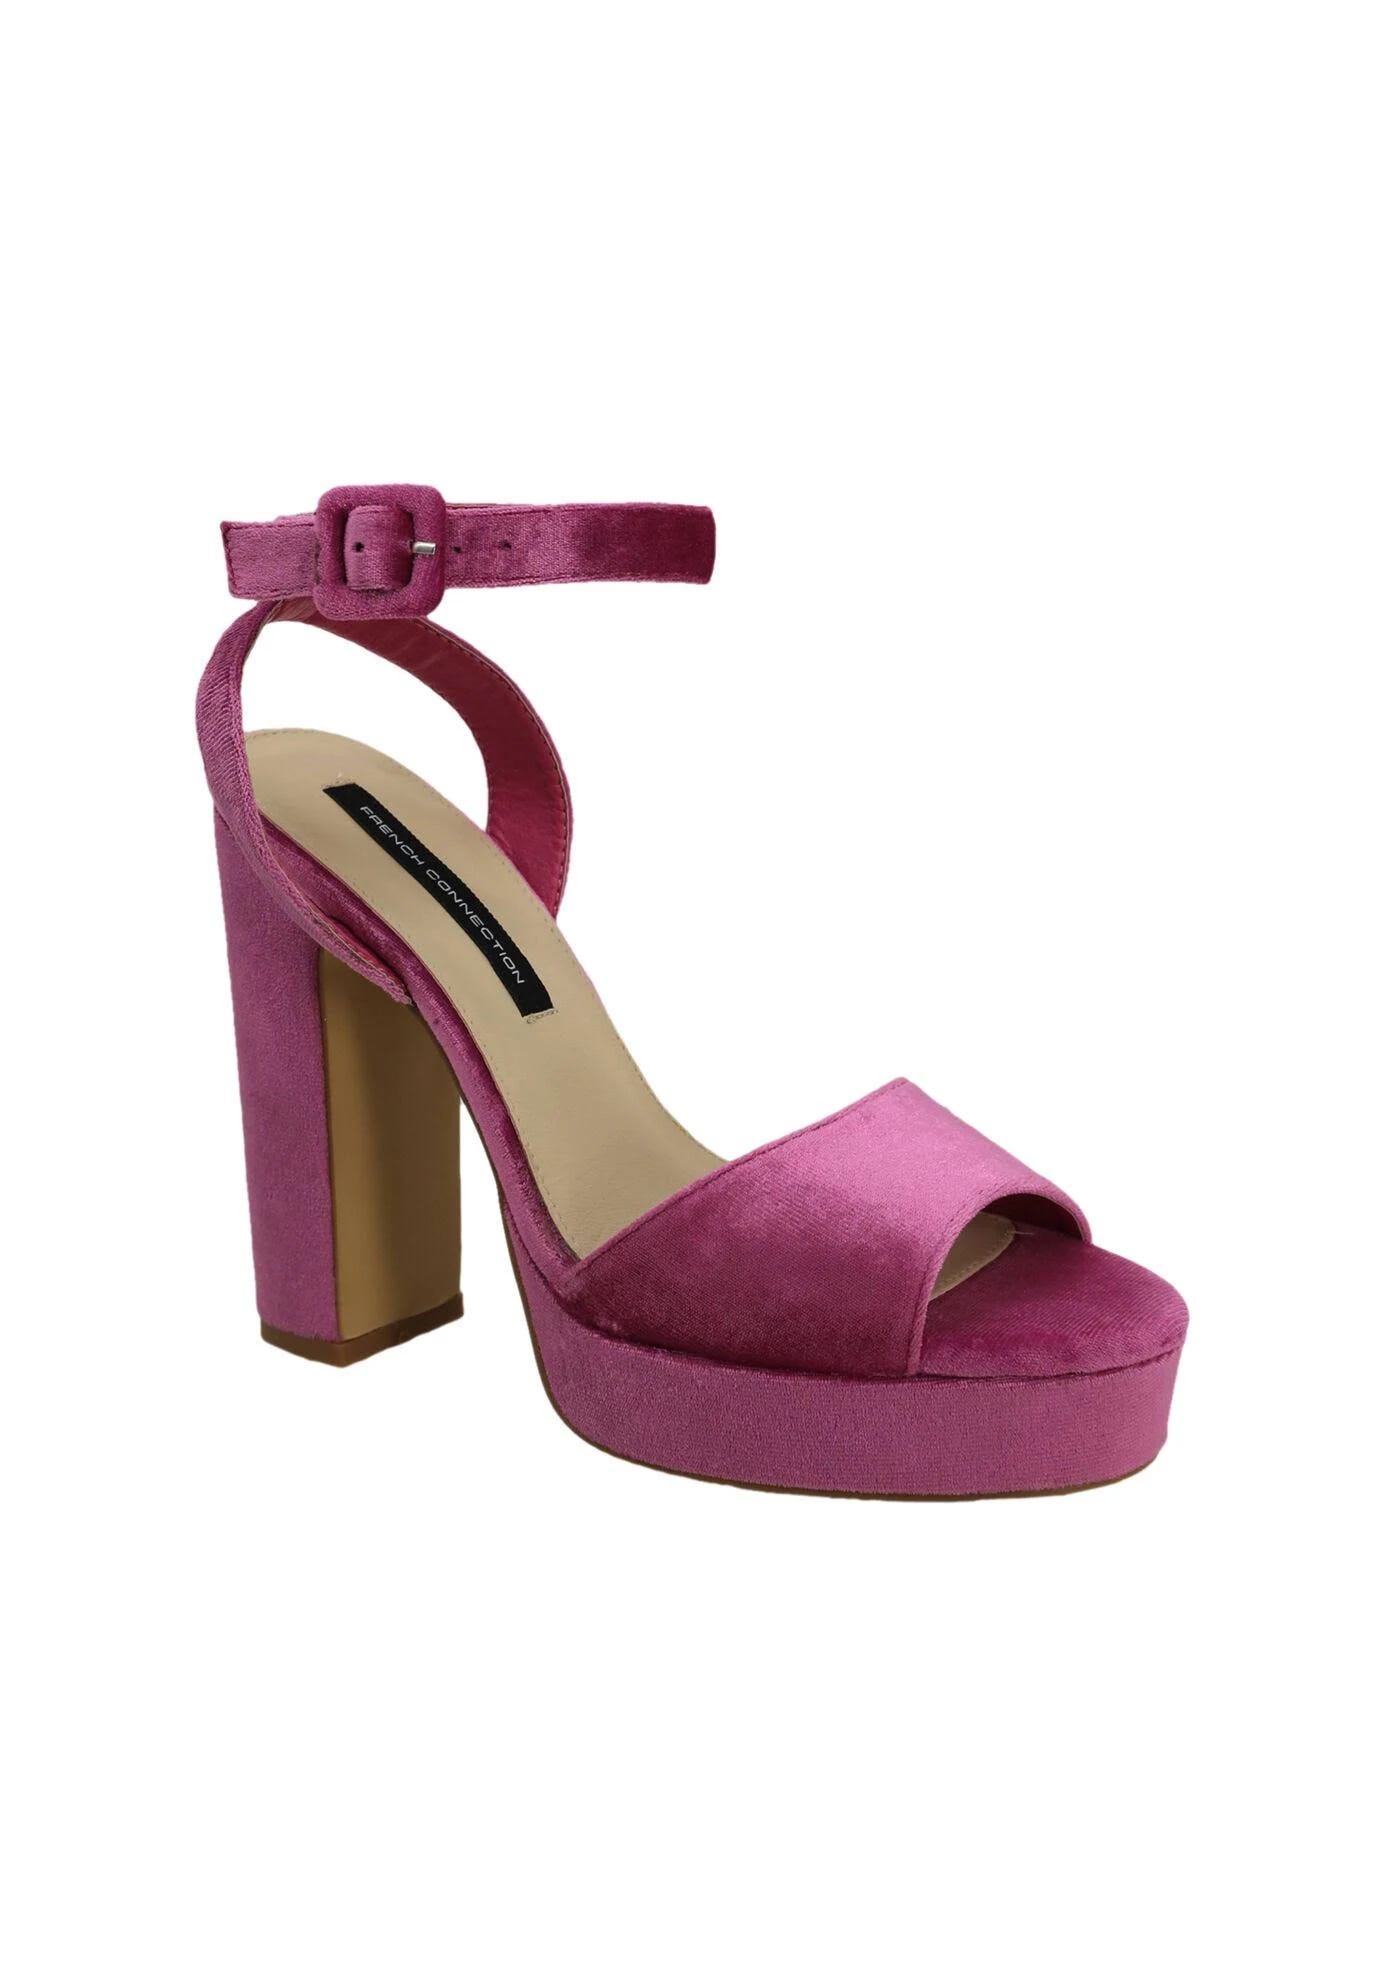 Chic Women's French Connection Pink Platform Sandals | Image